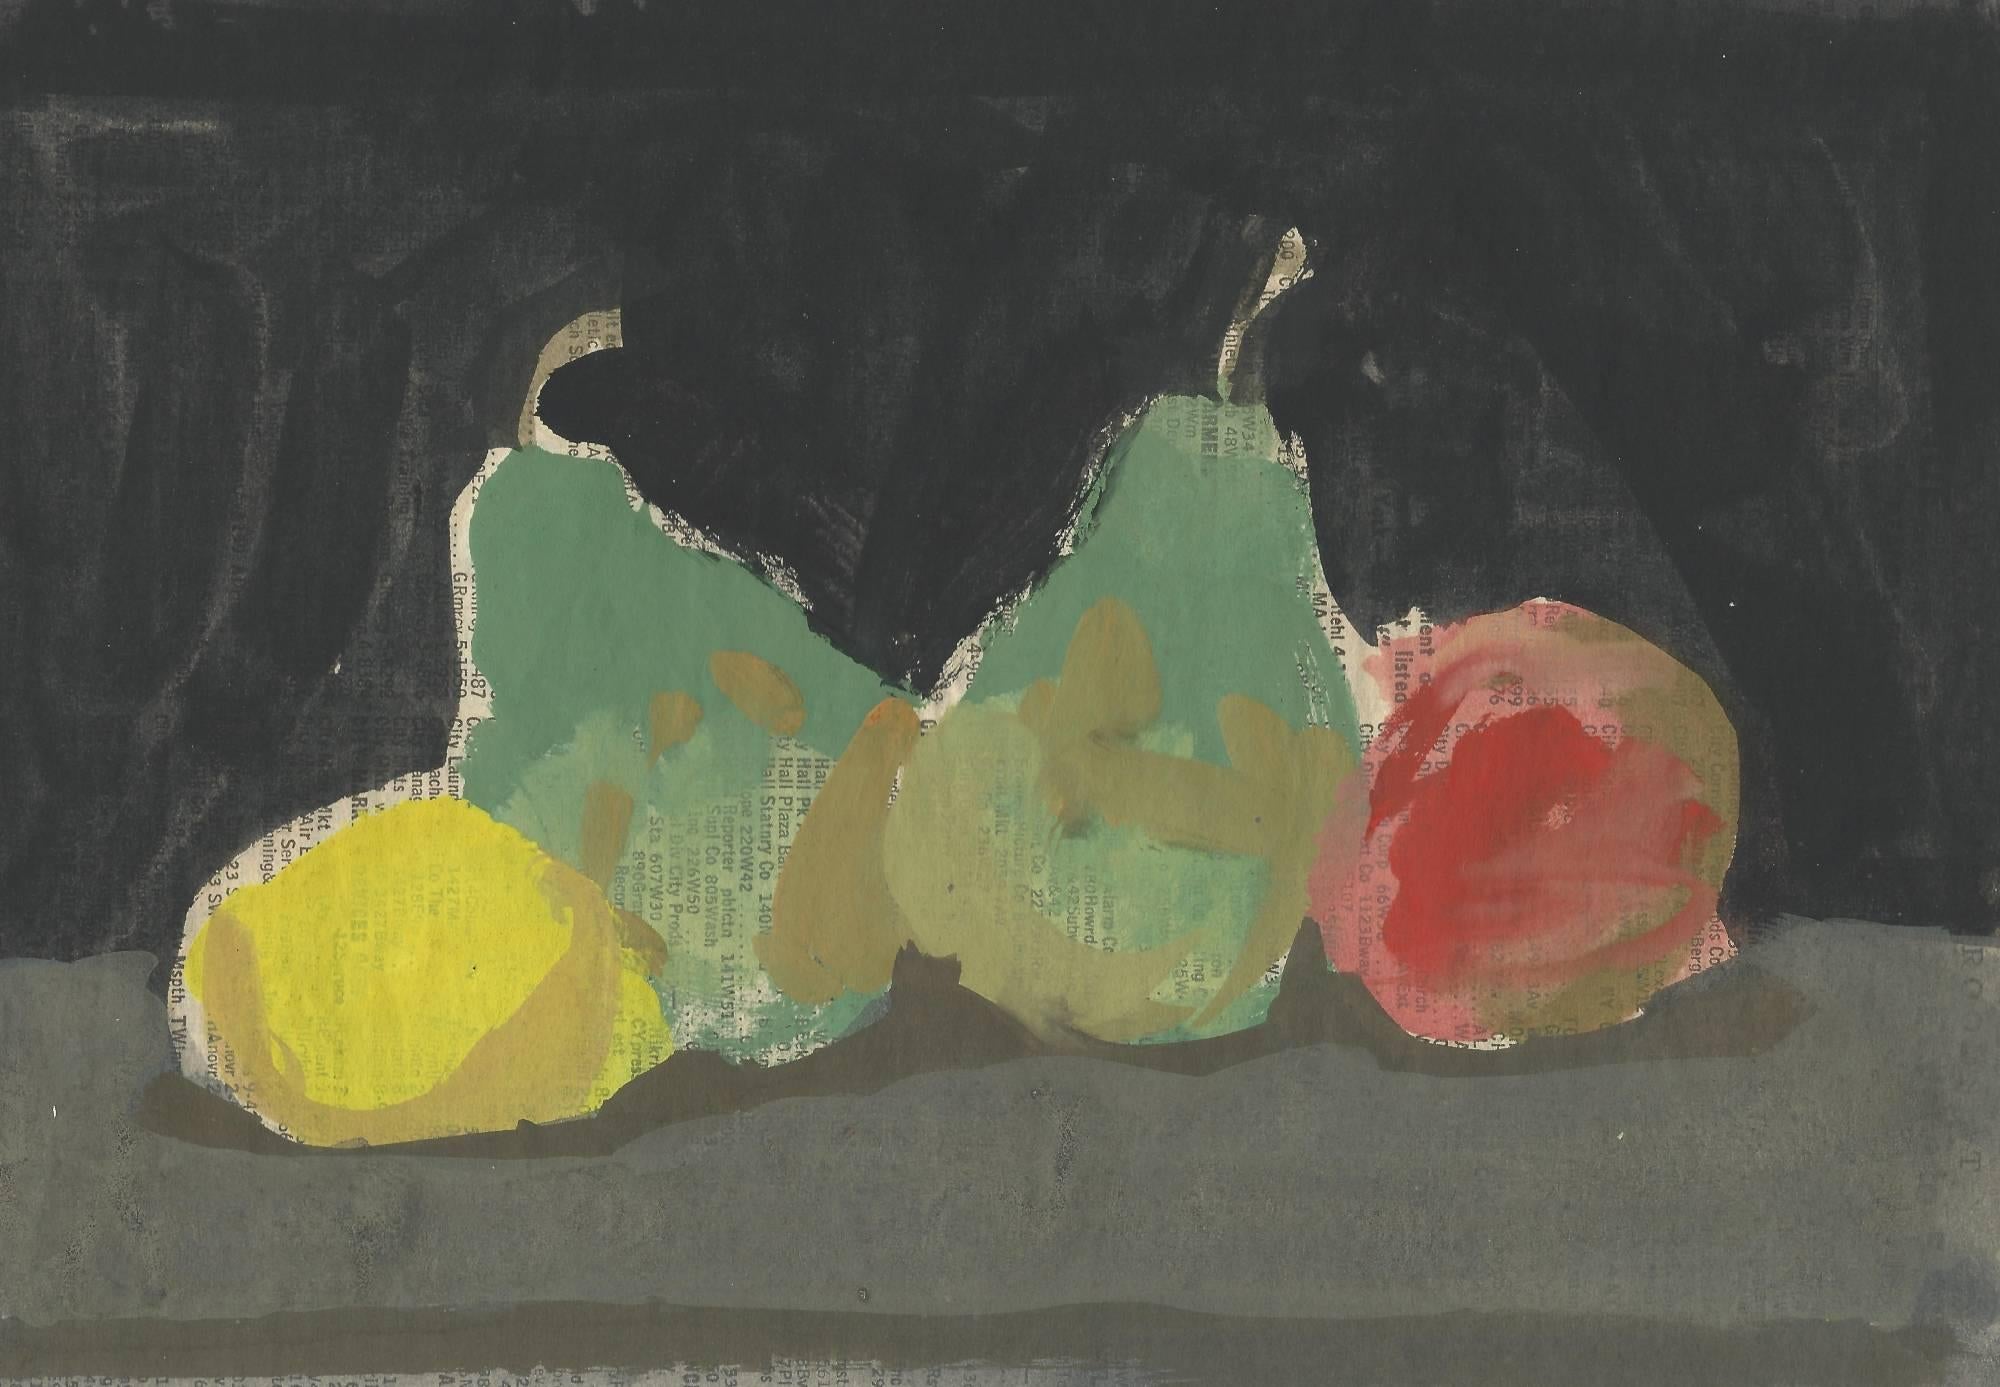 Lemon, Pears, and Apple on a Black Background - Art by Robert Kulicke